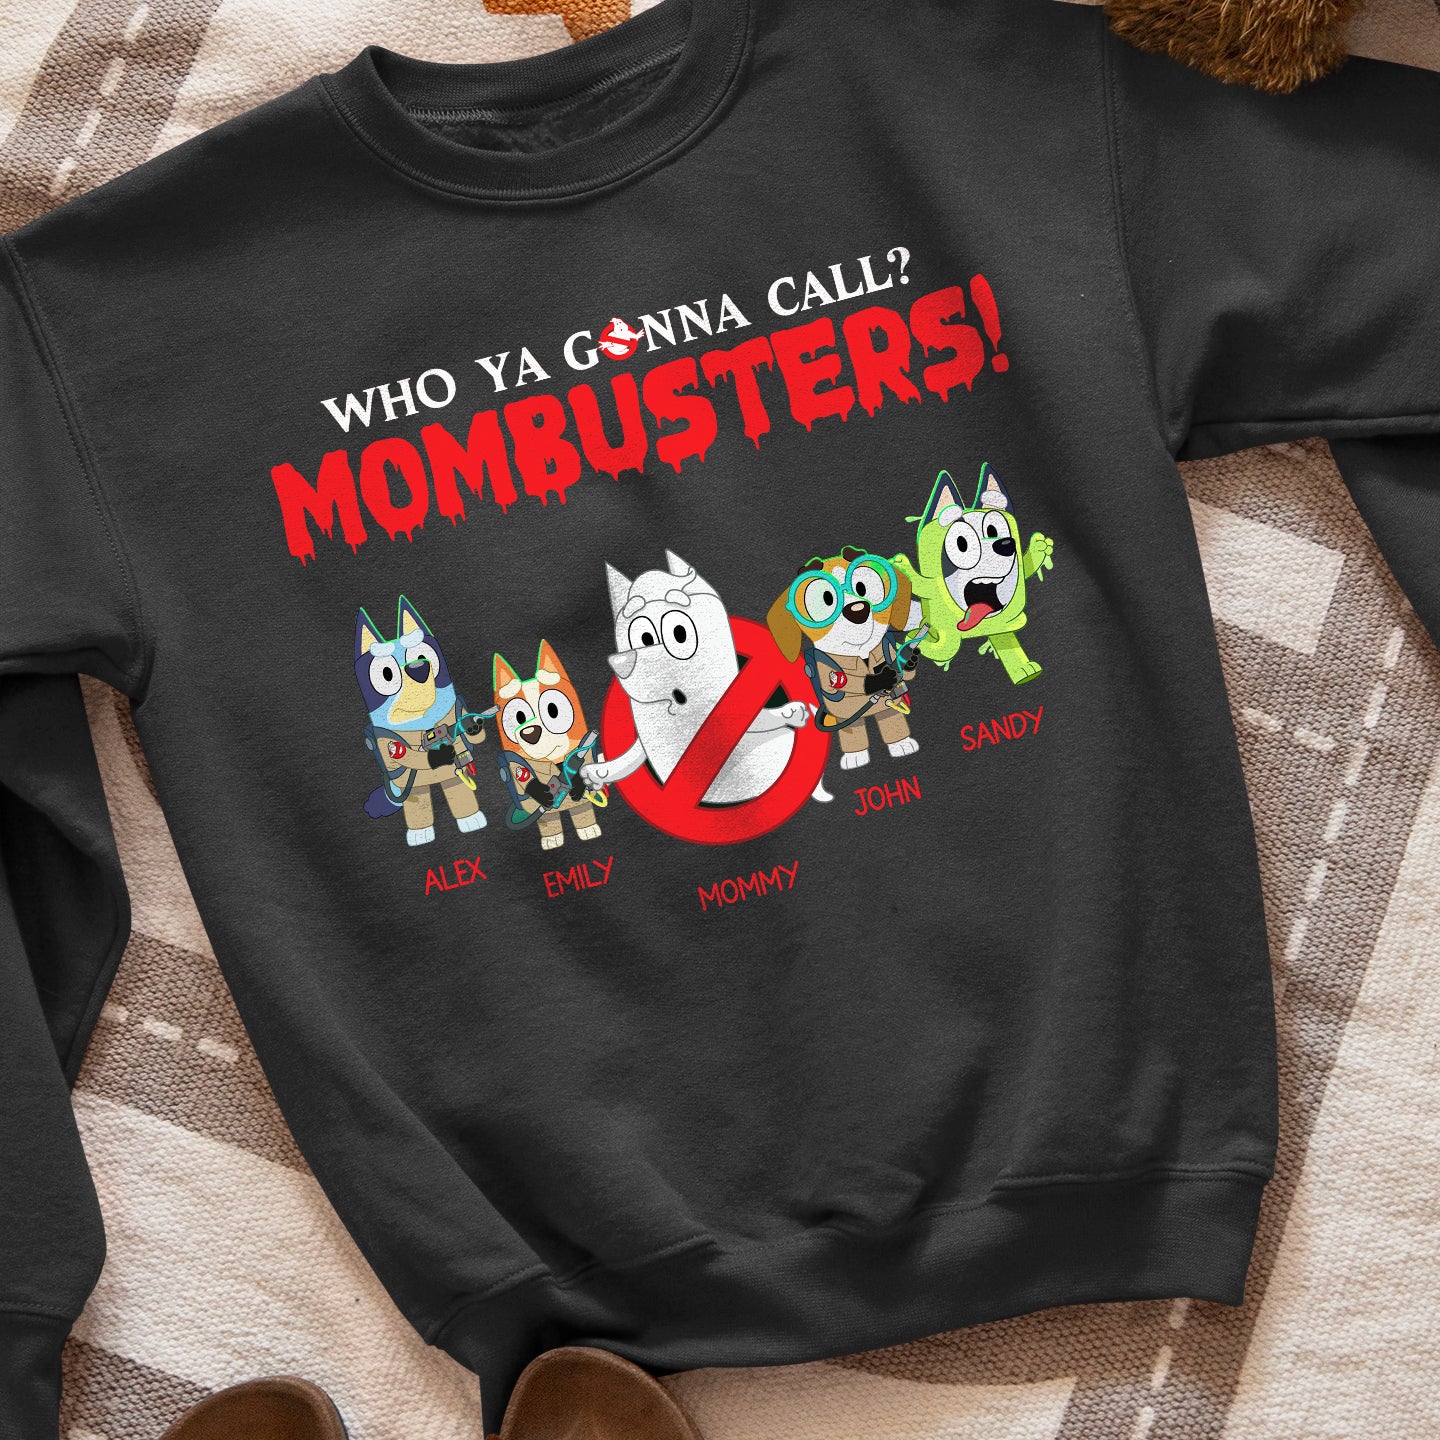 Personalized Gifts For Mom Shirt Who Ya Gonna Call? Mombusters! 03KAHN160324-Homacus